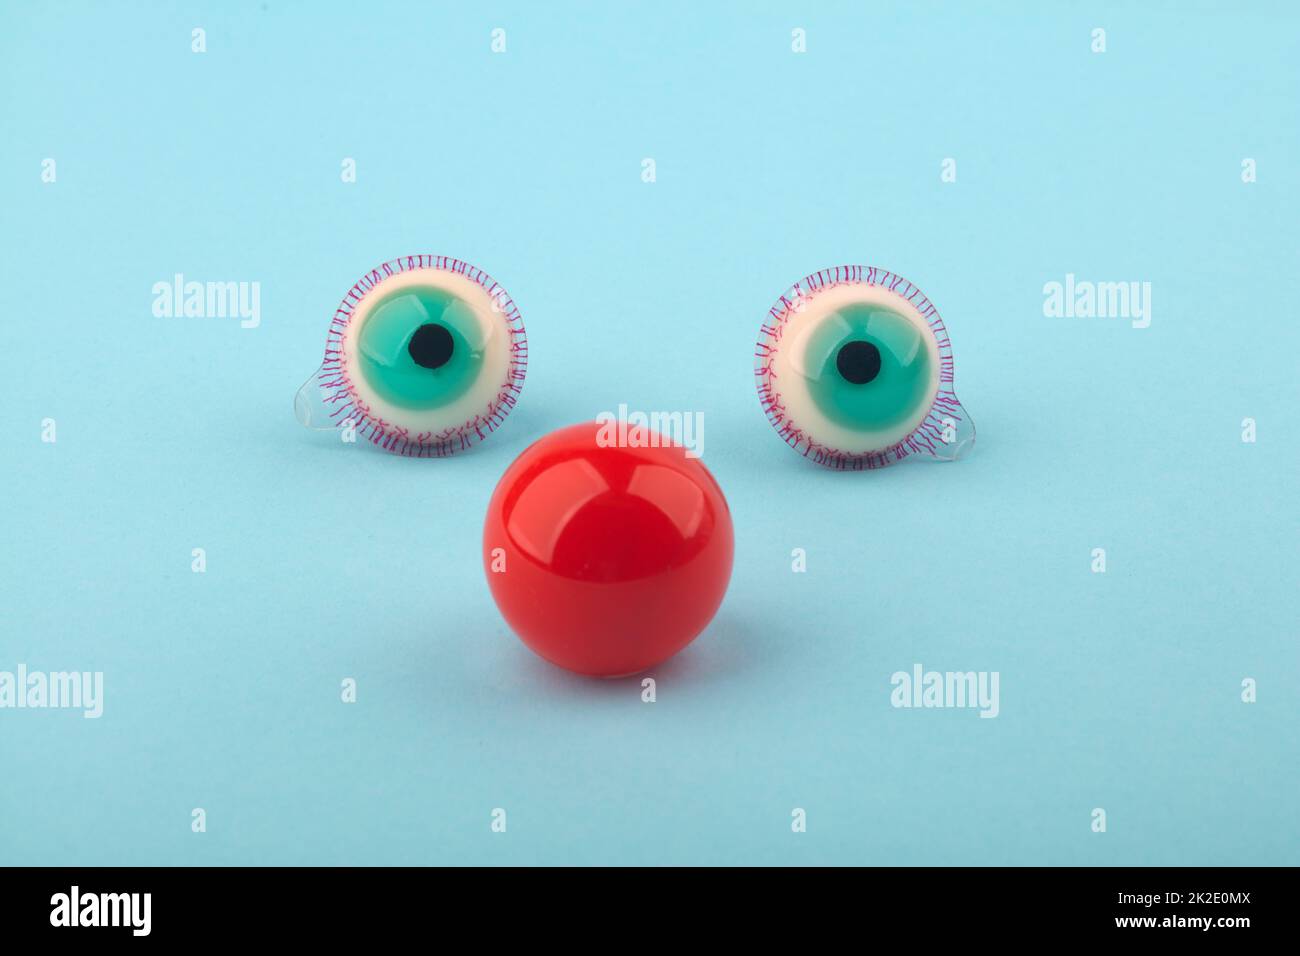 Decorative fruit candy eyes with red nose over light blue background. Conceptual photo using for funny celebration themes. Stock Photo